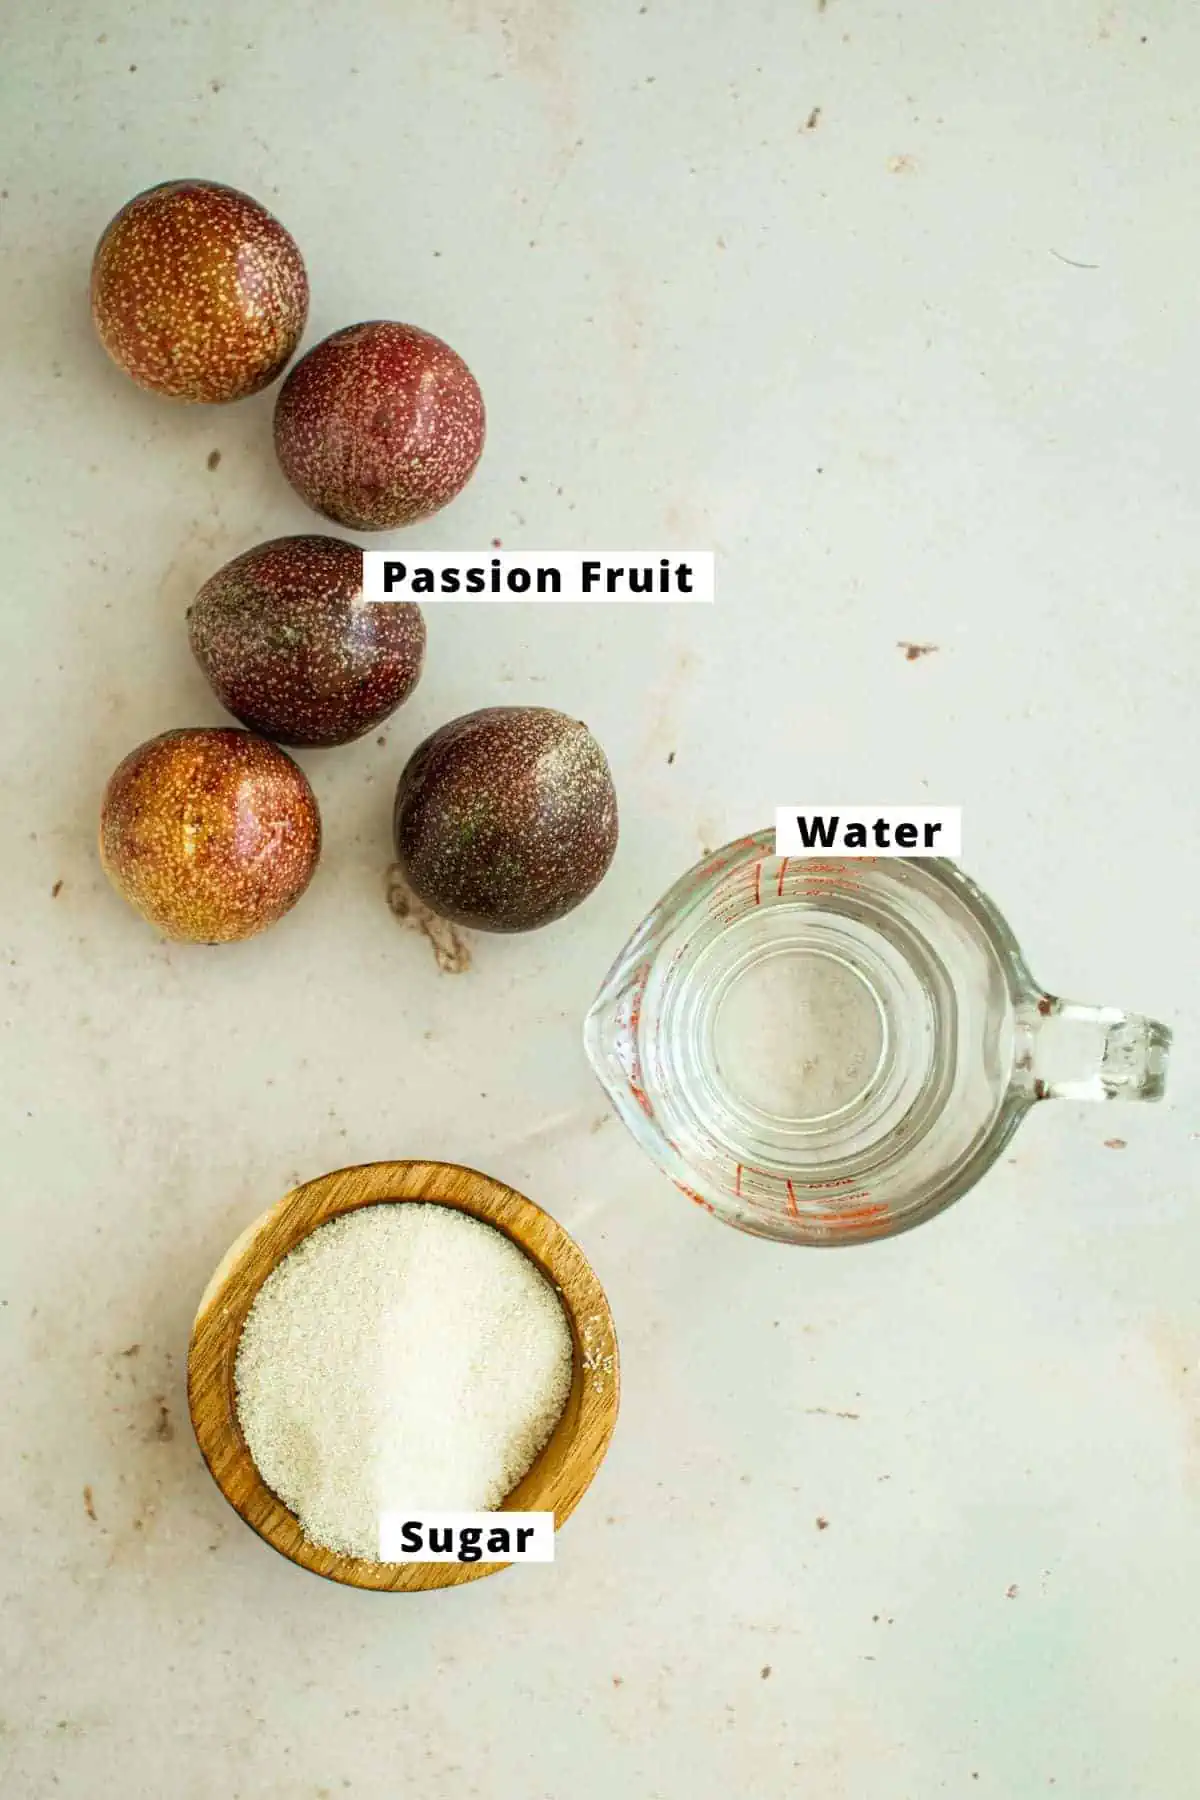 Ingredients in passion fruit syrup.